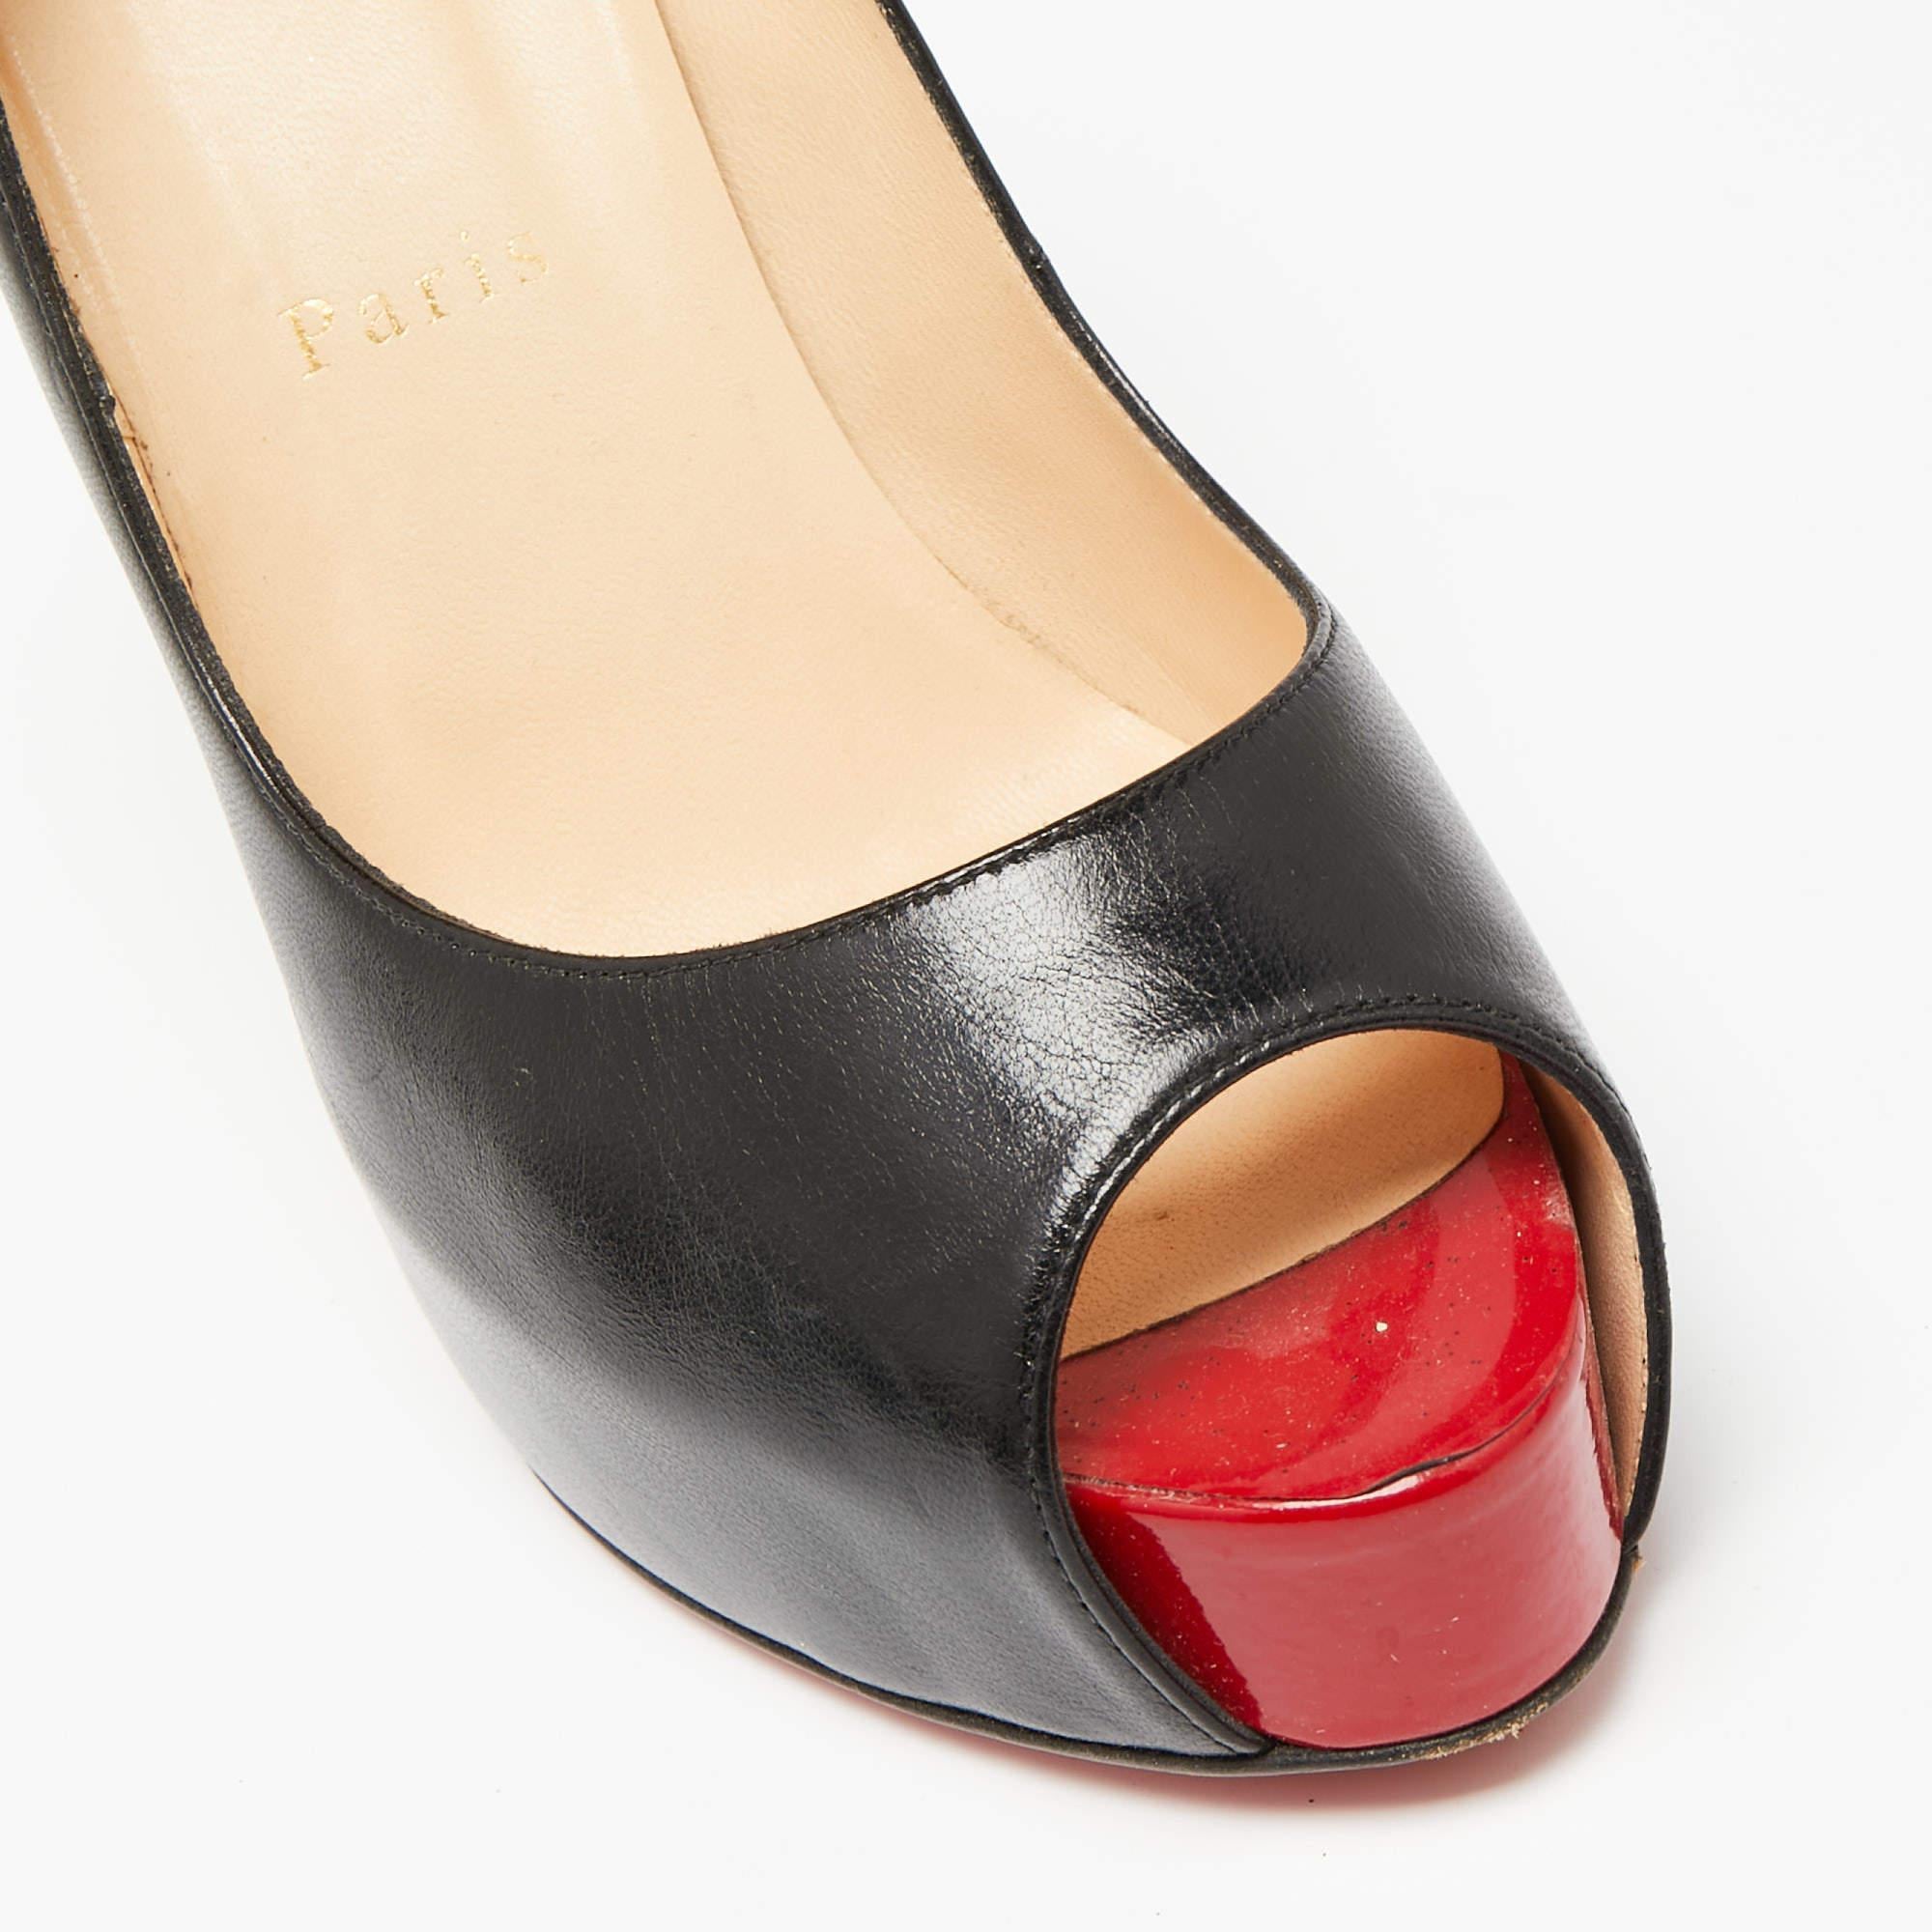 Christian Louboutin Black Leather Very Prive Peep-Toe Pumps Size 37 For Sale 2